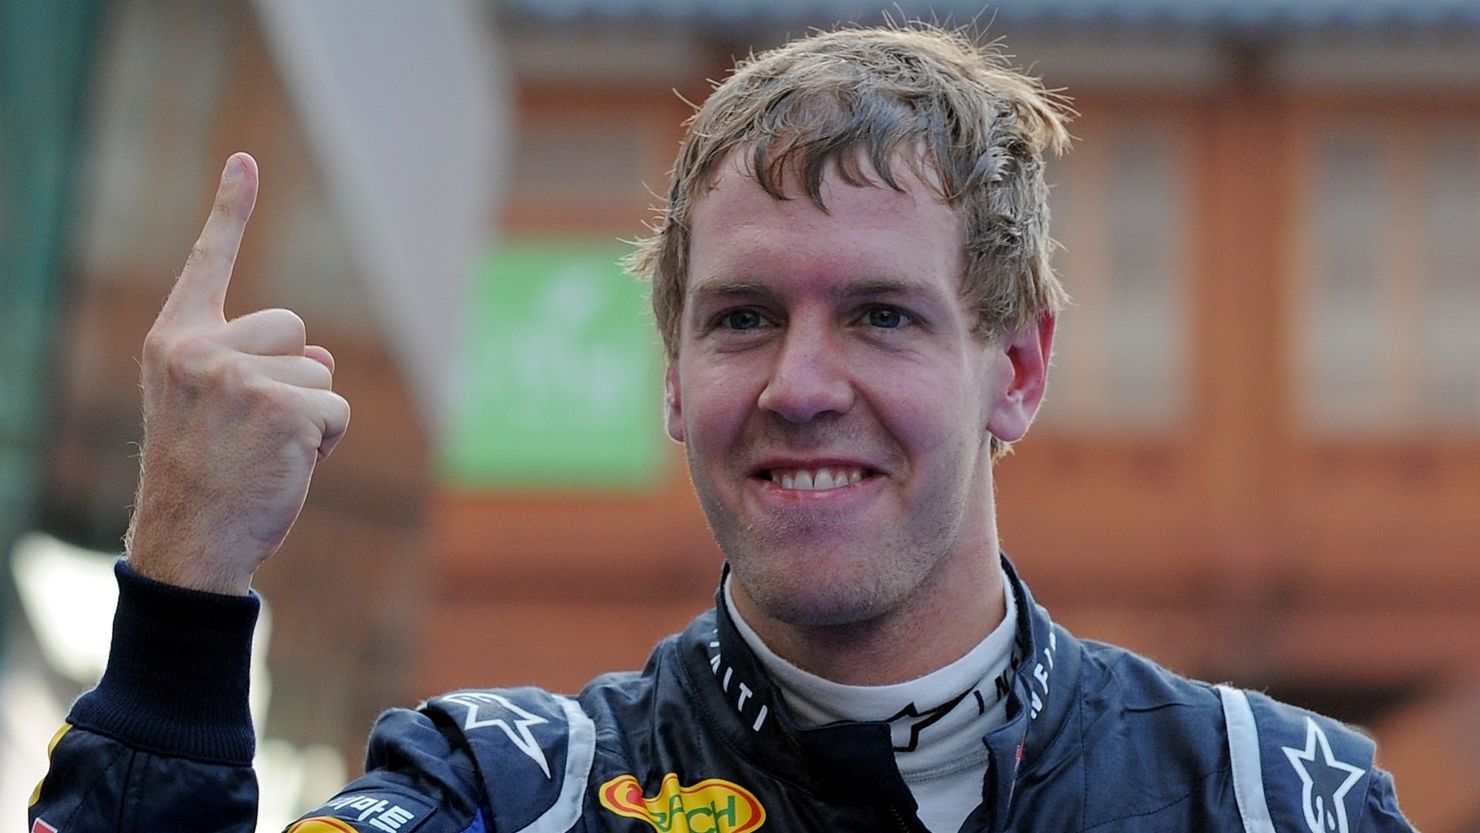 Sebastian Vettel is back at No. 1 in the drivers' standings after his Bahrain victory. 